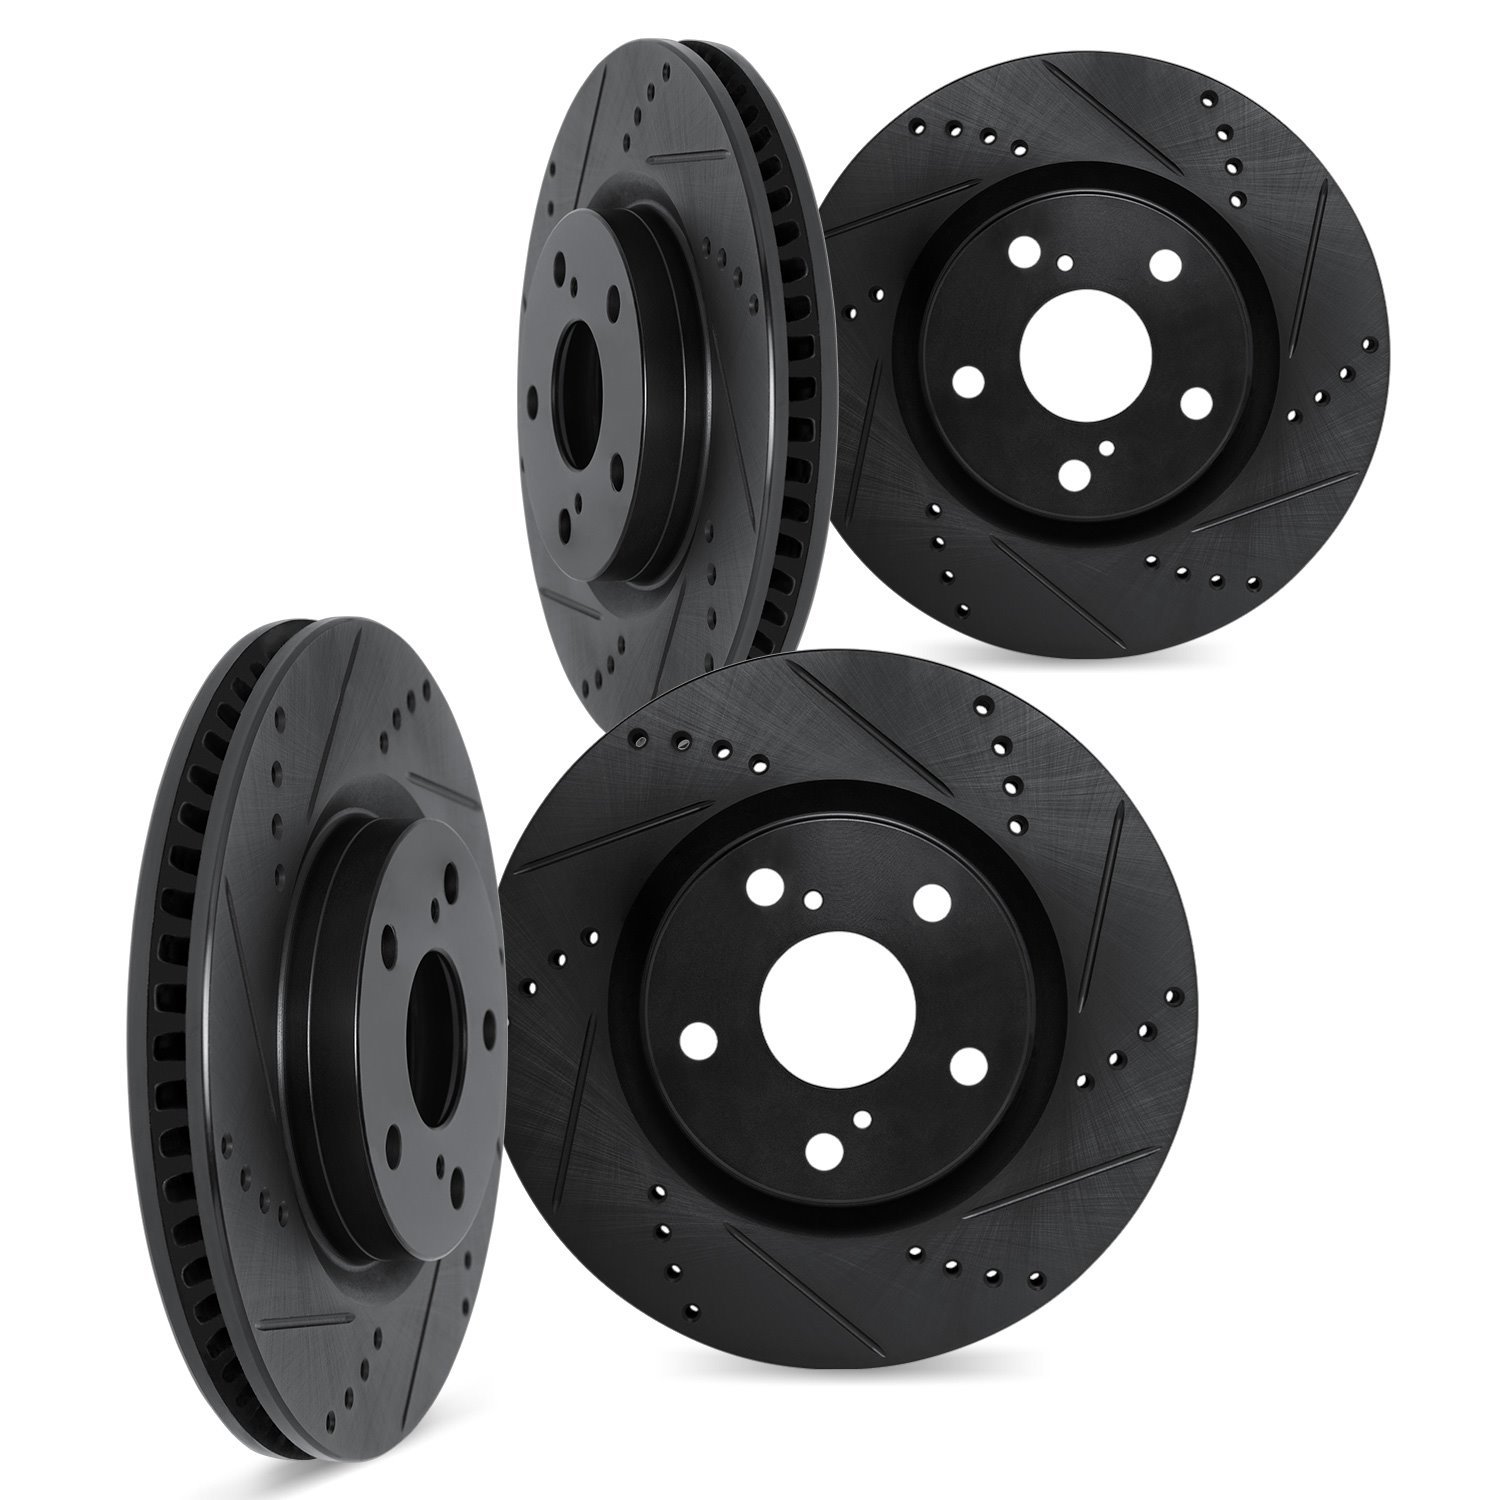 8004-73040 Drilled/Slotted Brake Rotors [Black], 1999-2004 Audi/Volkswagen, Position: Front and Rear